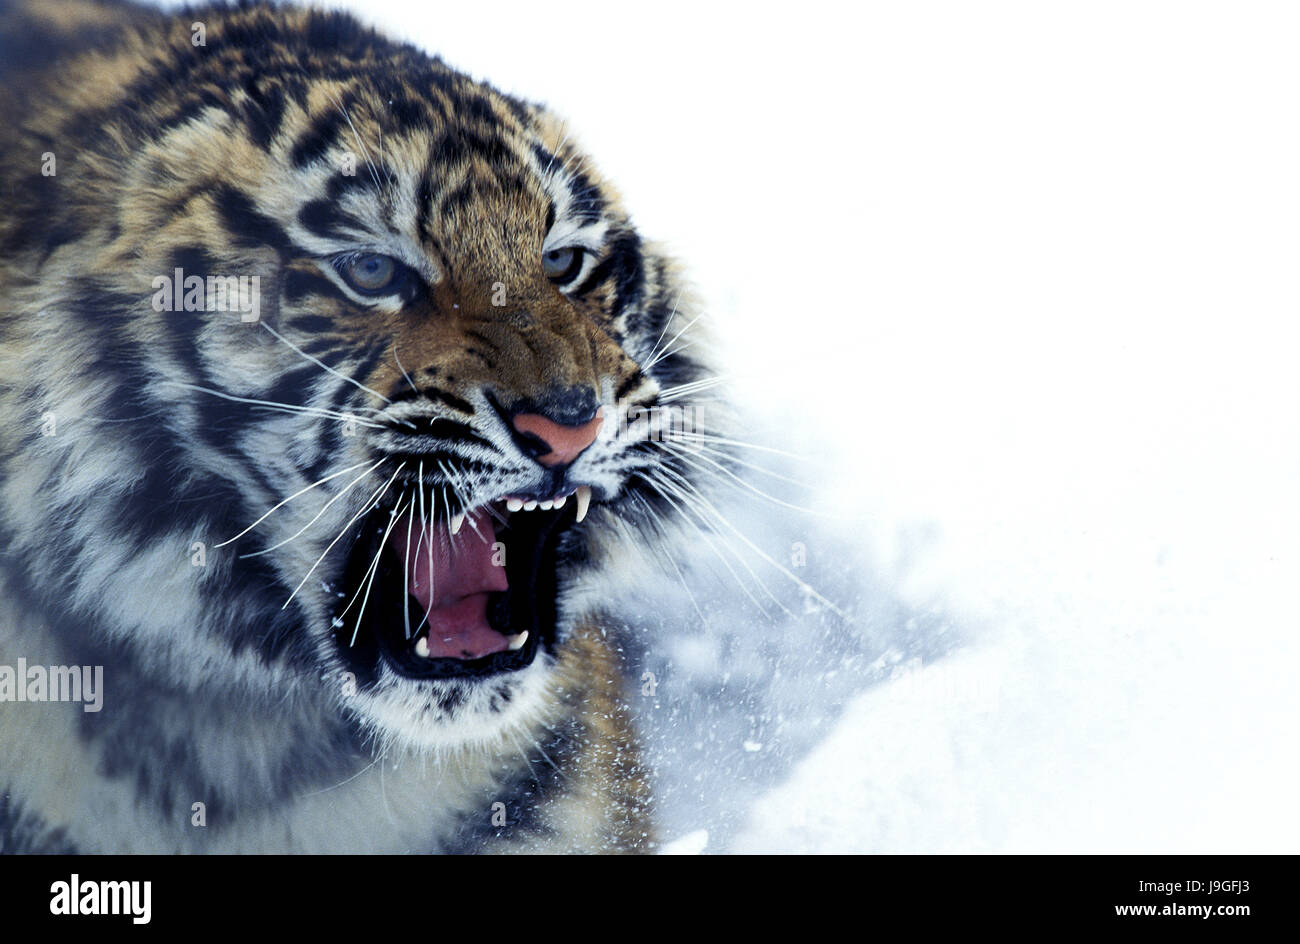 Siberian Tiger, panthera tigris altaica, Adult Snarling in Defensive Posture Stock Photo